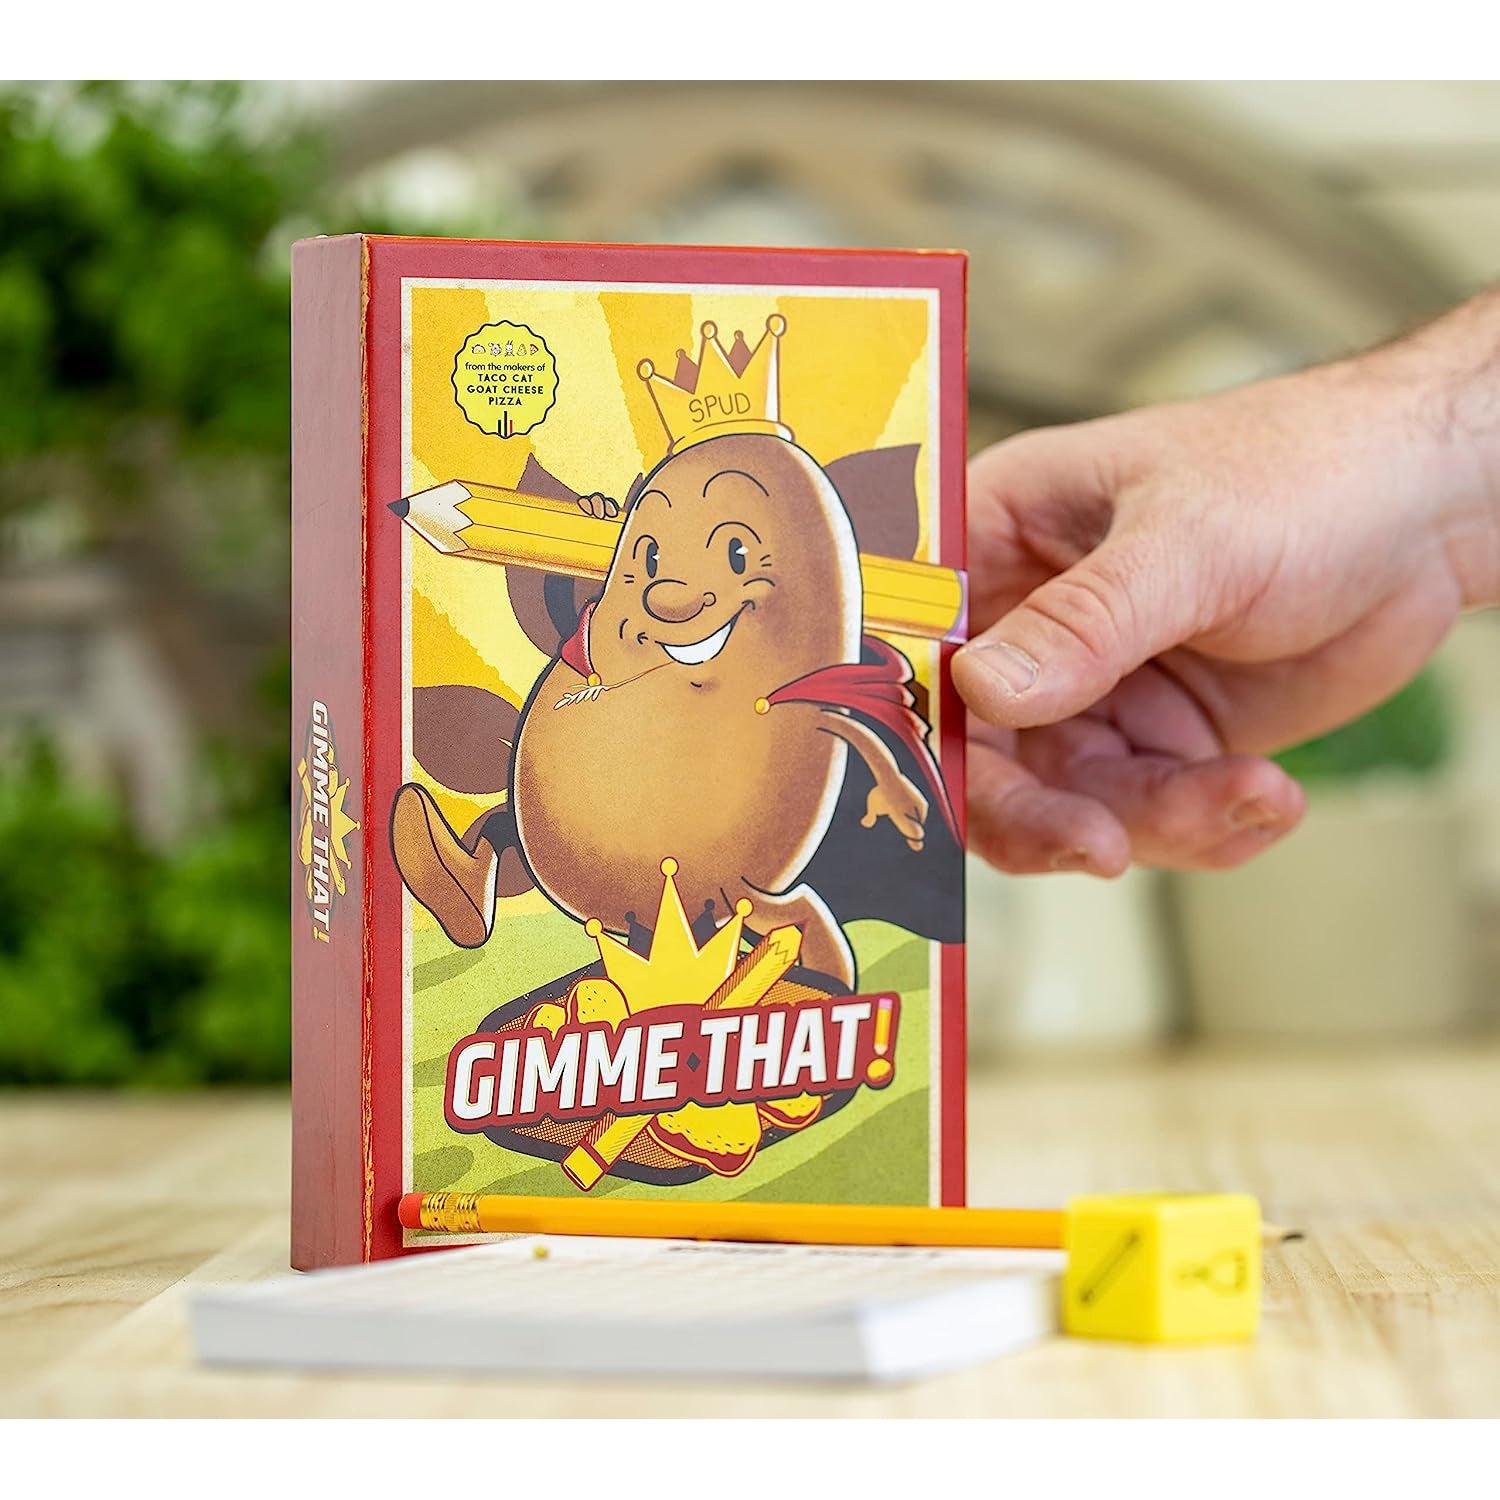 Front view of Gimme That! game in its box.